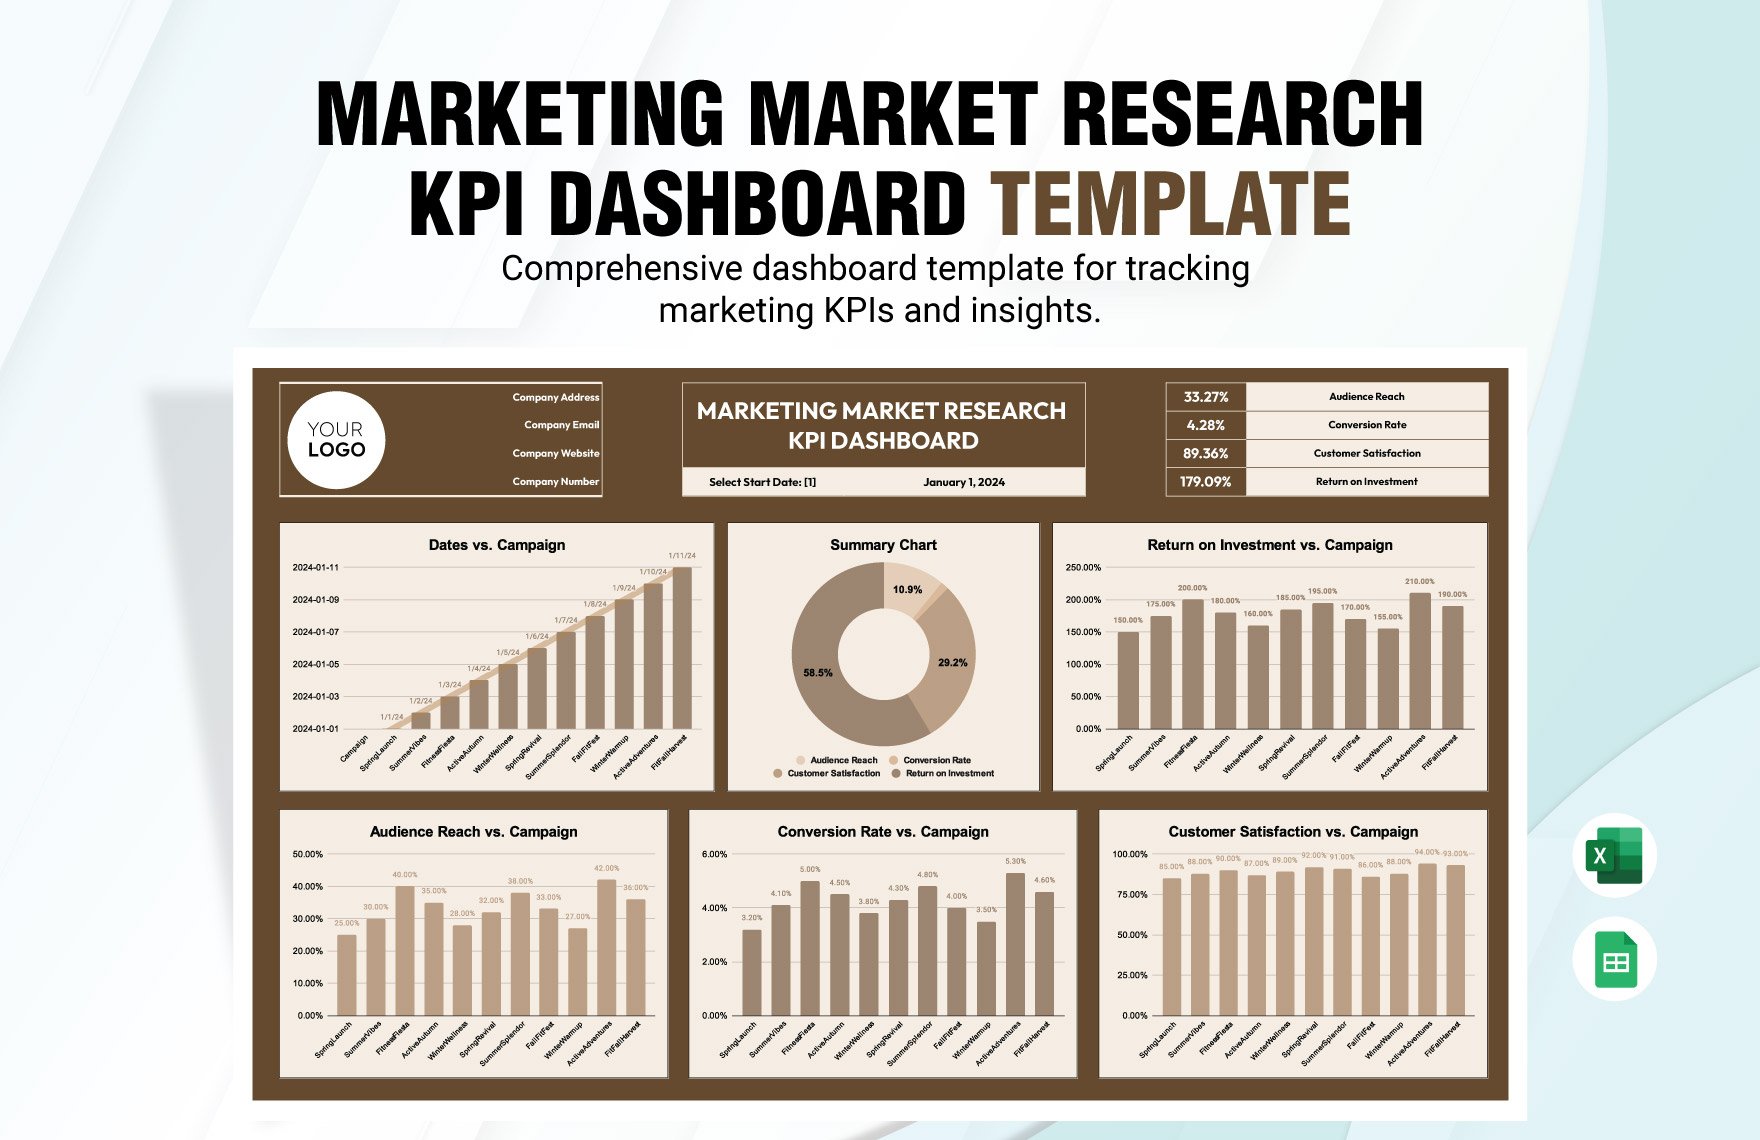 Marketing Market Research KPI Dashboard Template in Excel, Google Sheets